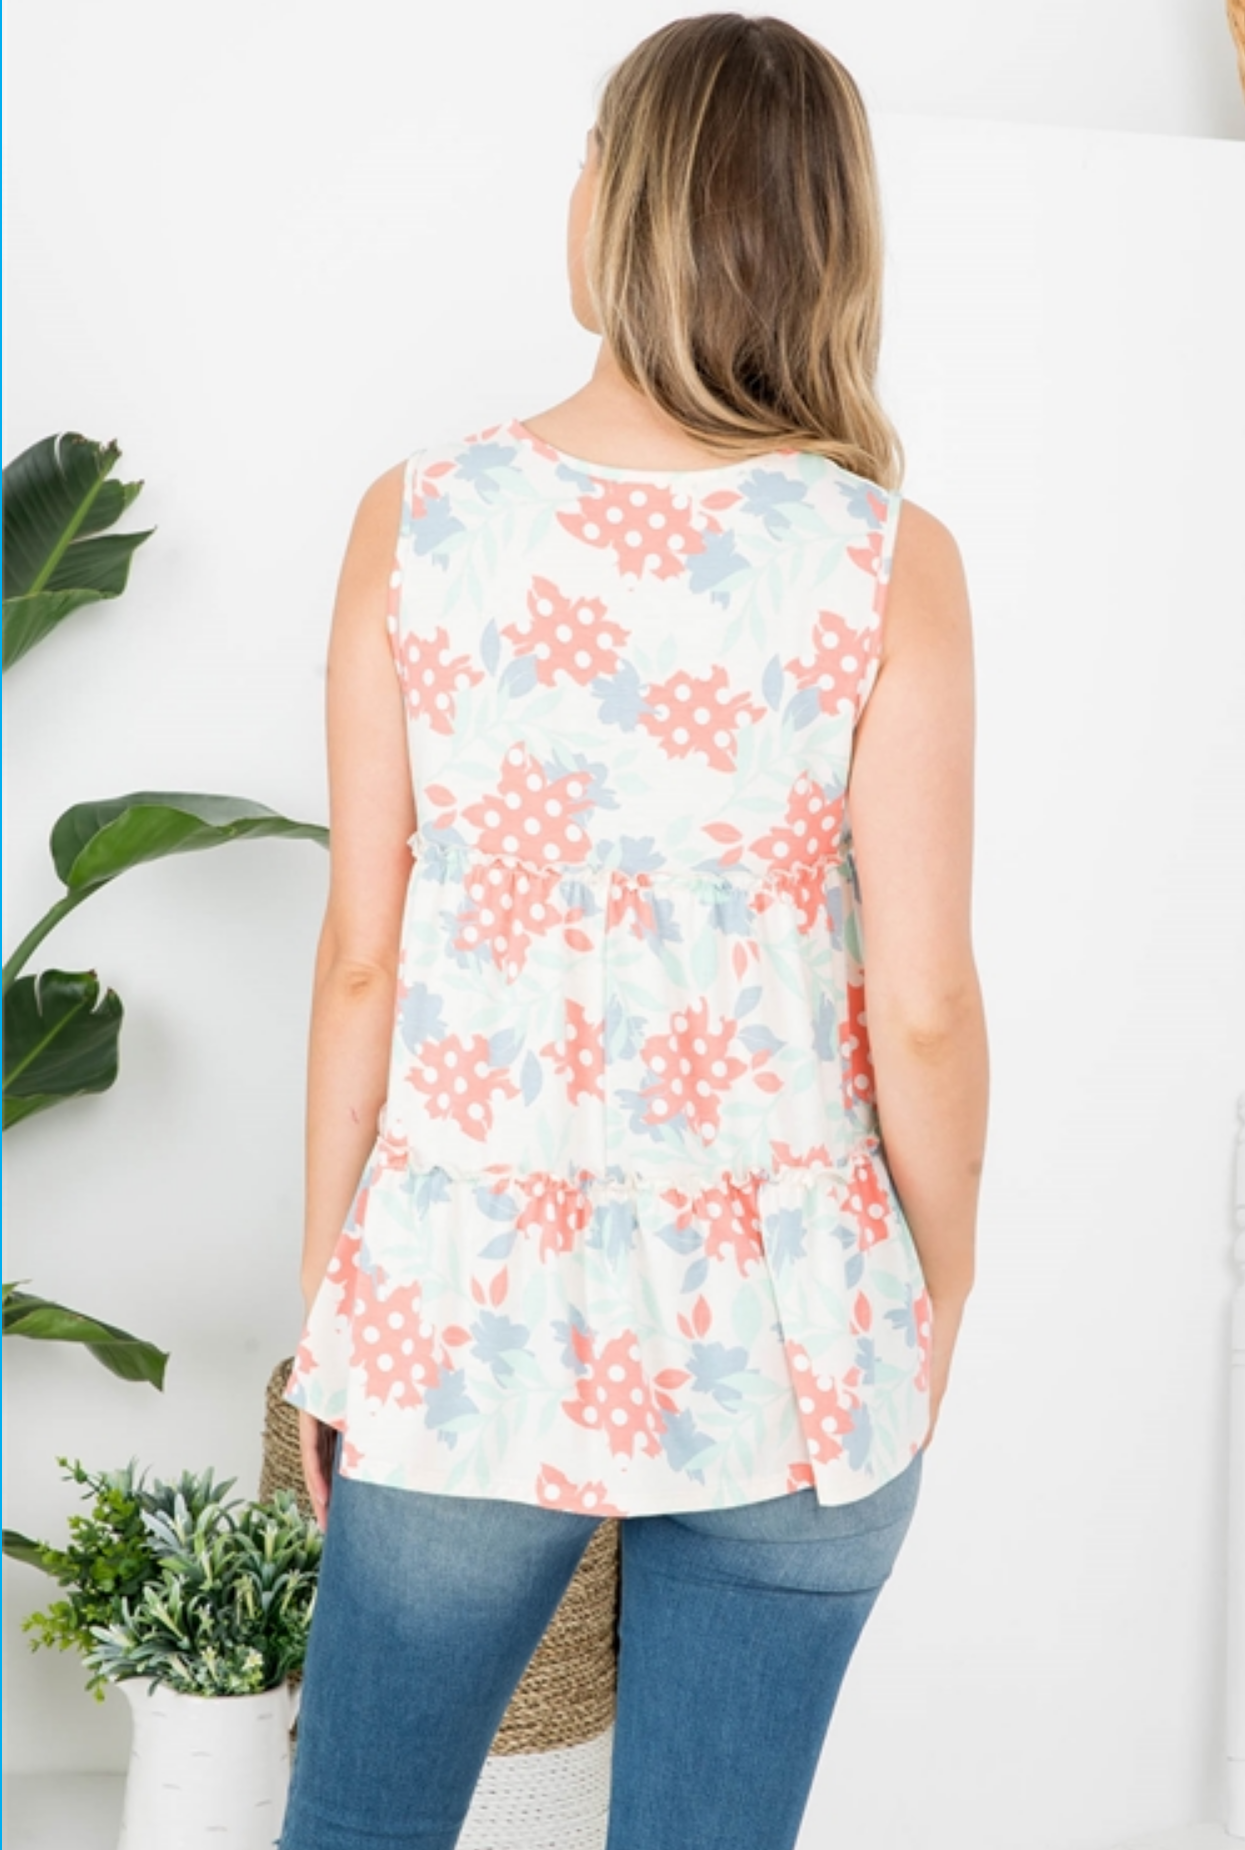 FLORAL PULL MERROW TANK TOP- IVORY